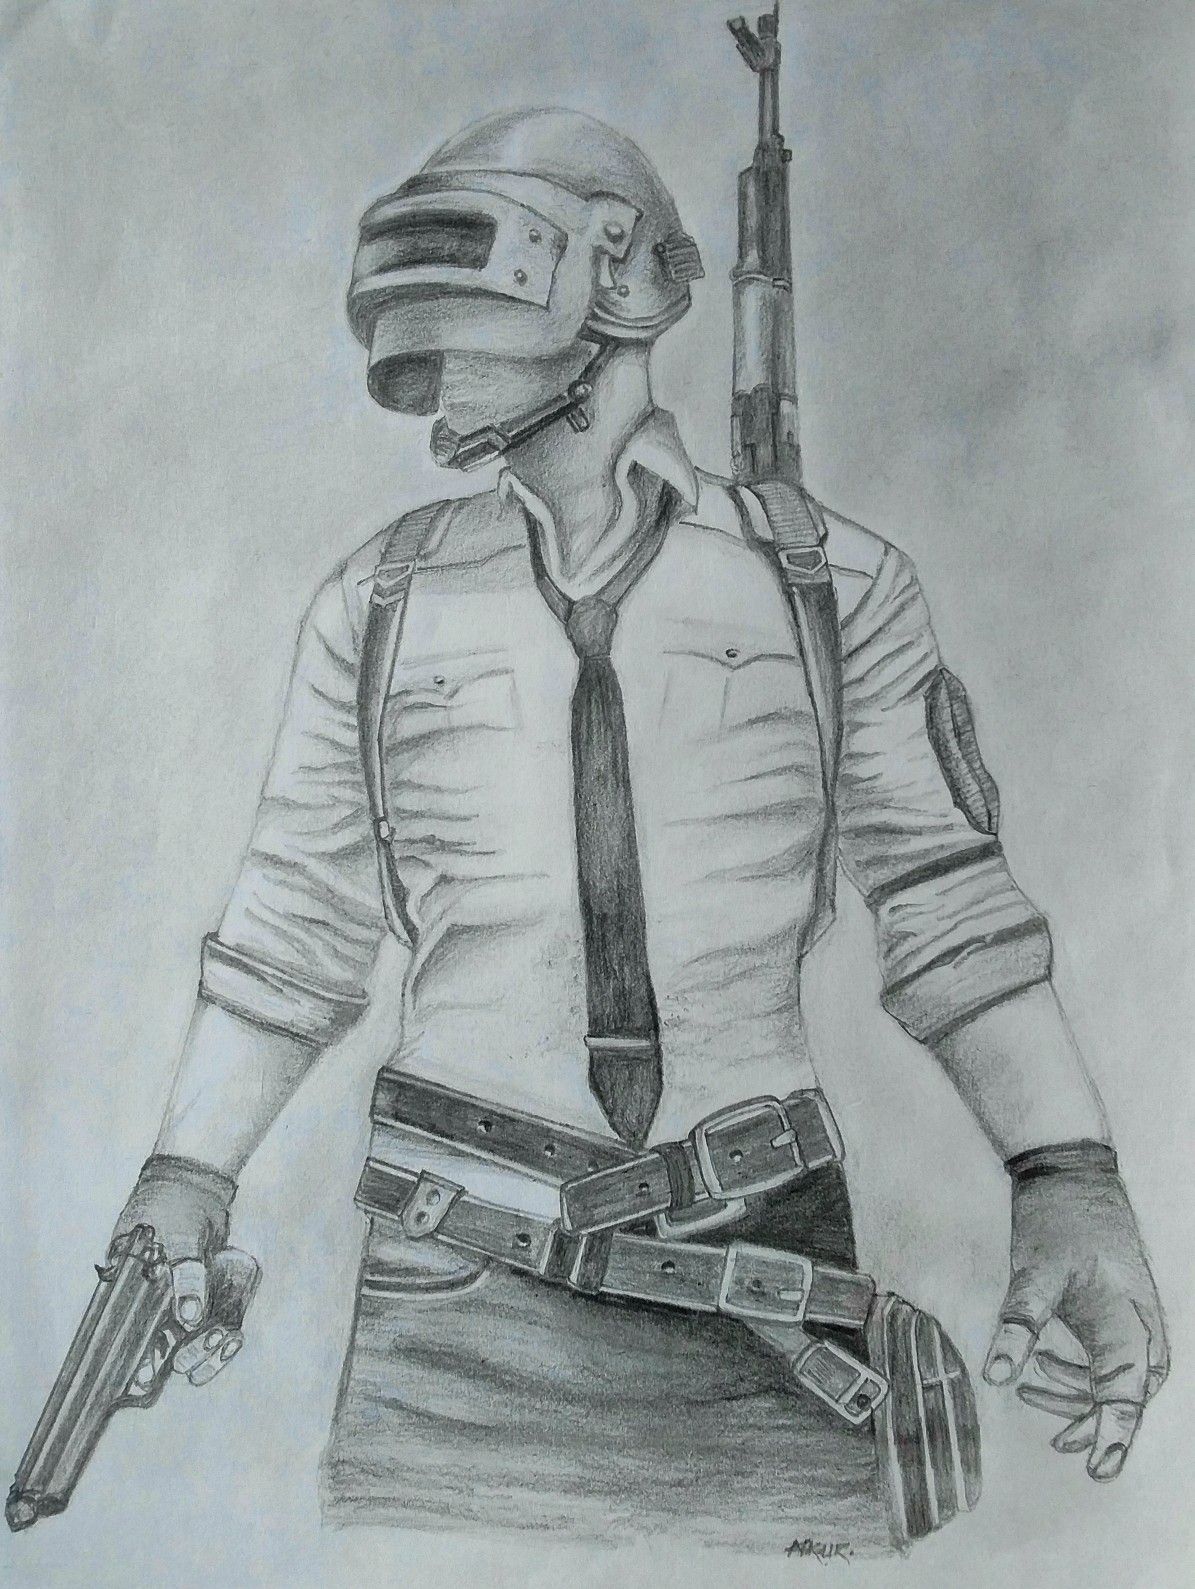 PUBG SKETCH by Ankur. Character sketches, Art drawings sketches creative, Art drawings sketches simple